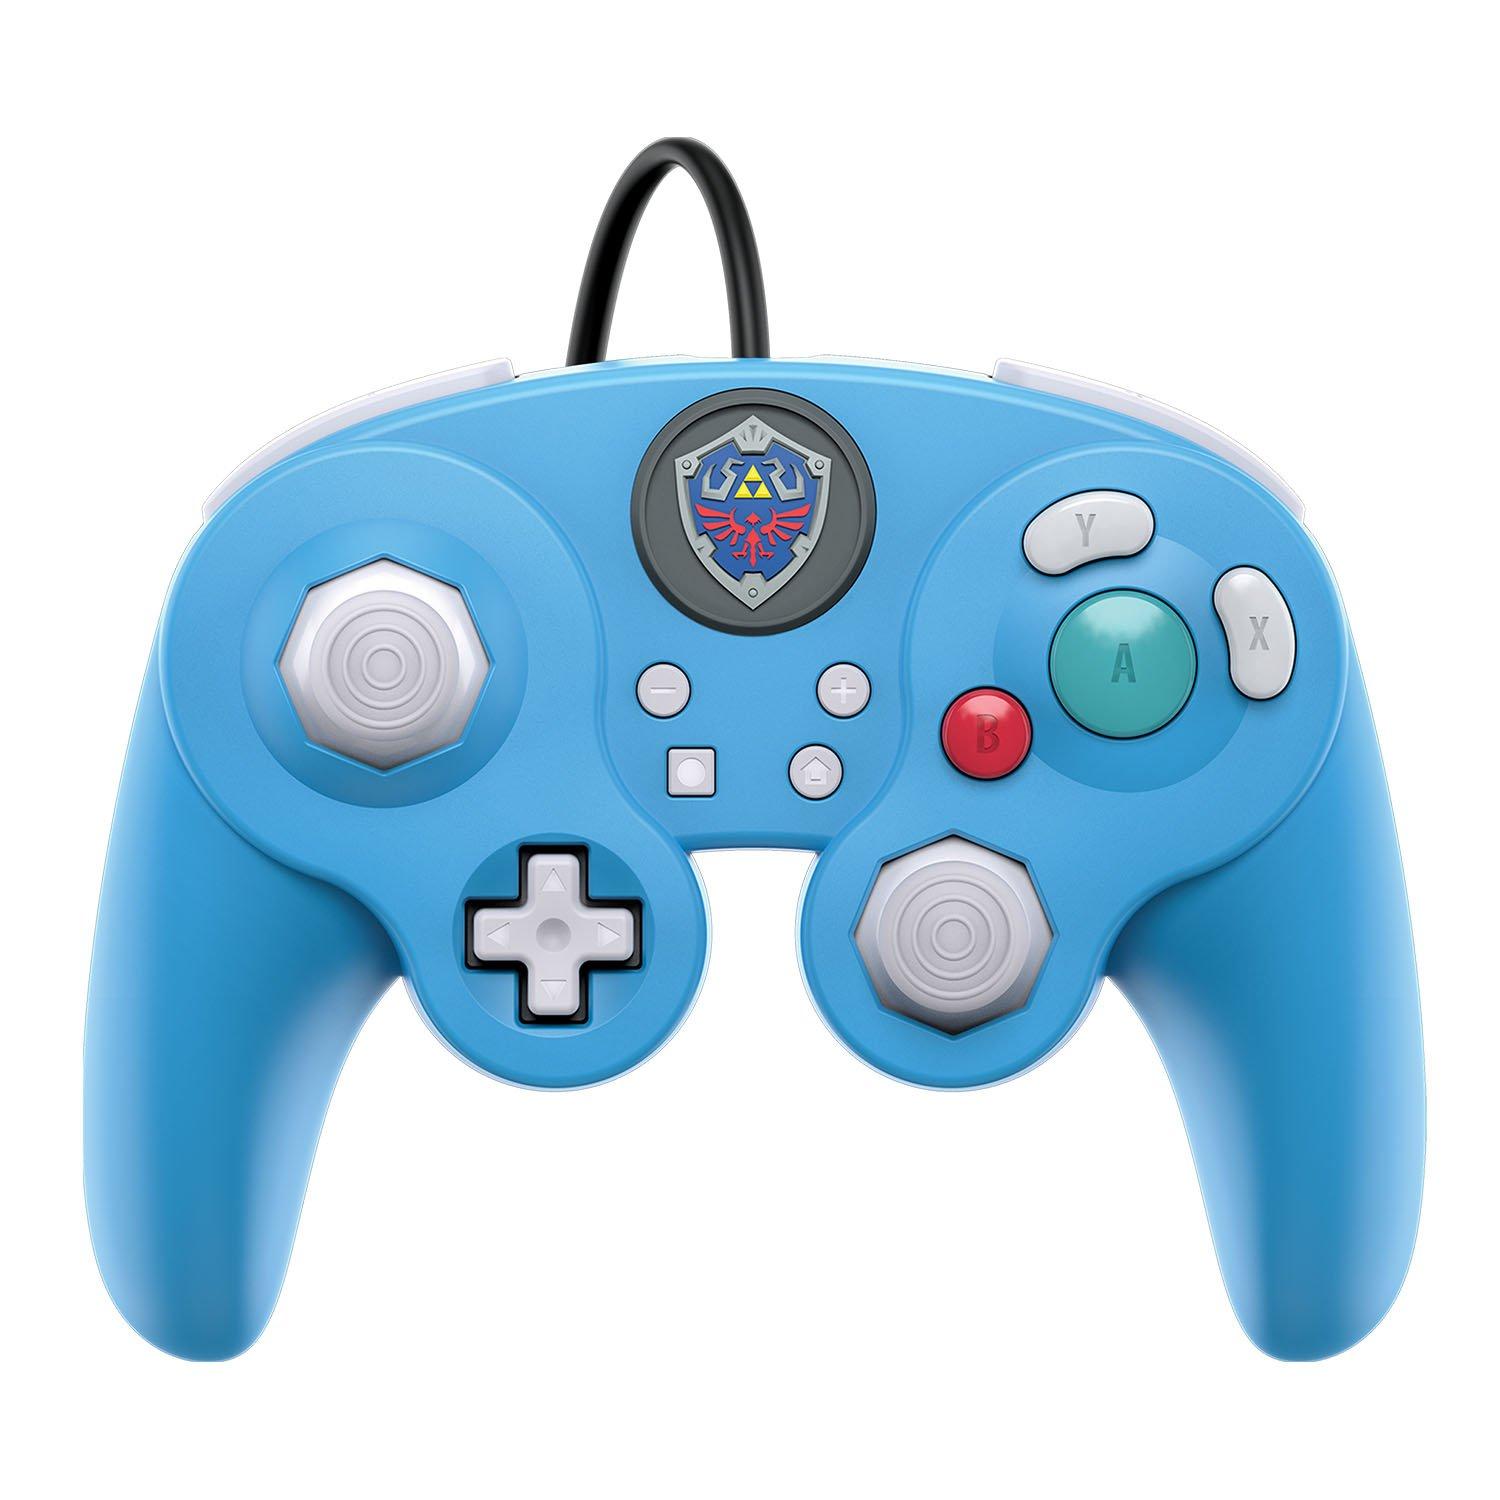 switch pro gamecube controller